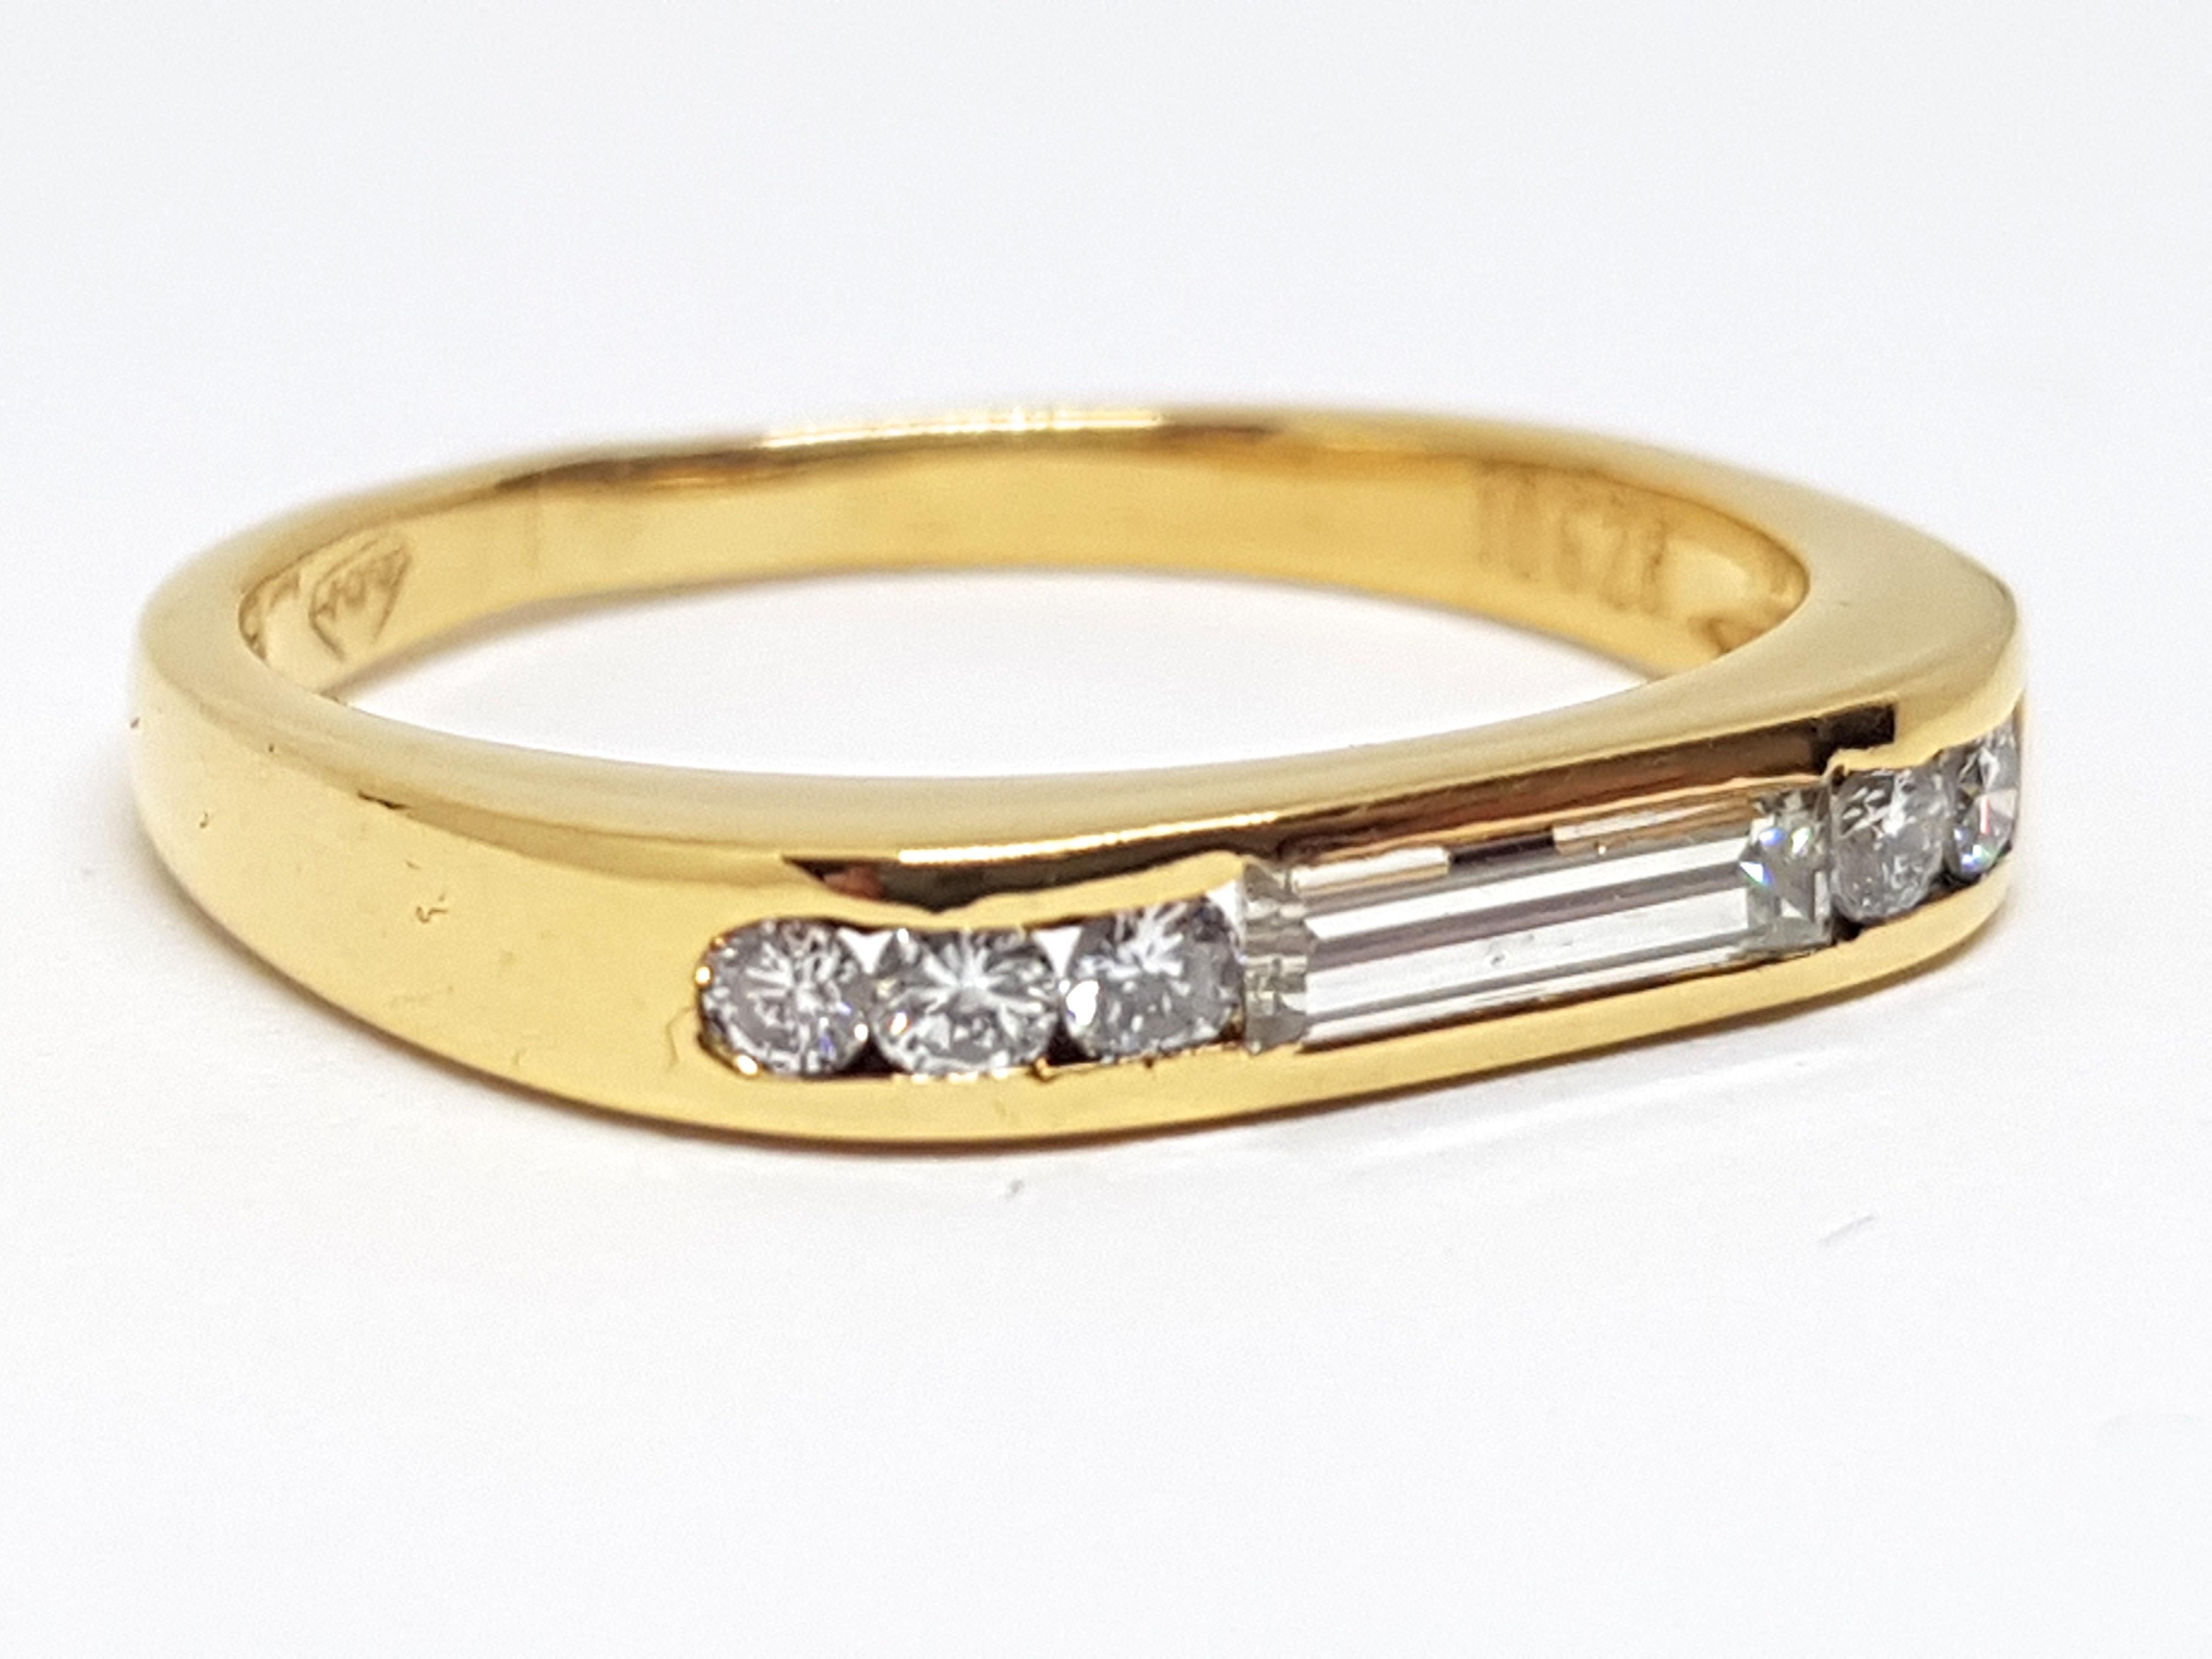 Gold: 18K Yellow Gold. 
Weight: 3,45 gr. 
Long Baguette: 0,40ct. F / VS 
Round Diamonds: 0,30ct. F / VS 
Width: 0,35 cm 
Ringsize: 54 / 17,25mm / US 7
Free resizing of ring up to size 70 / 22mm / US 13
Shipping: free worldwide insured shipping 
All